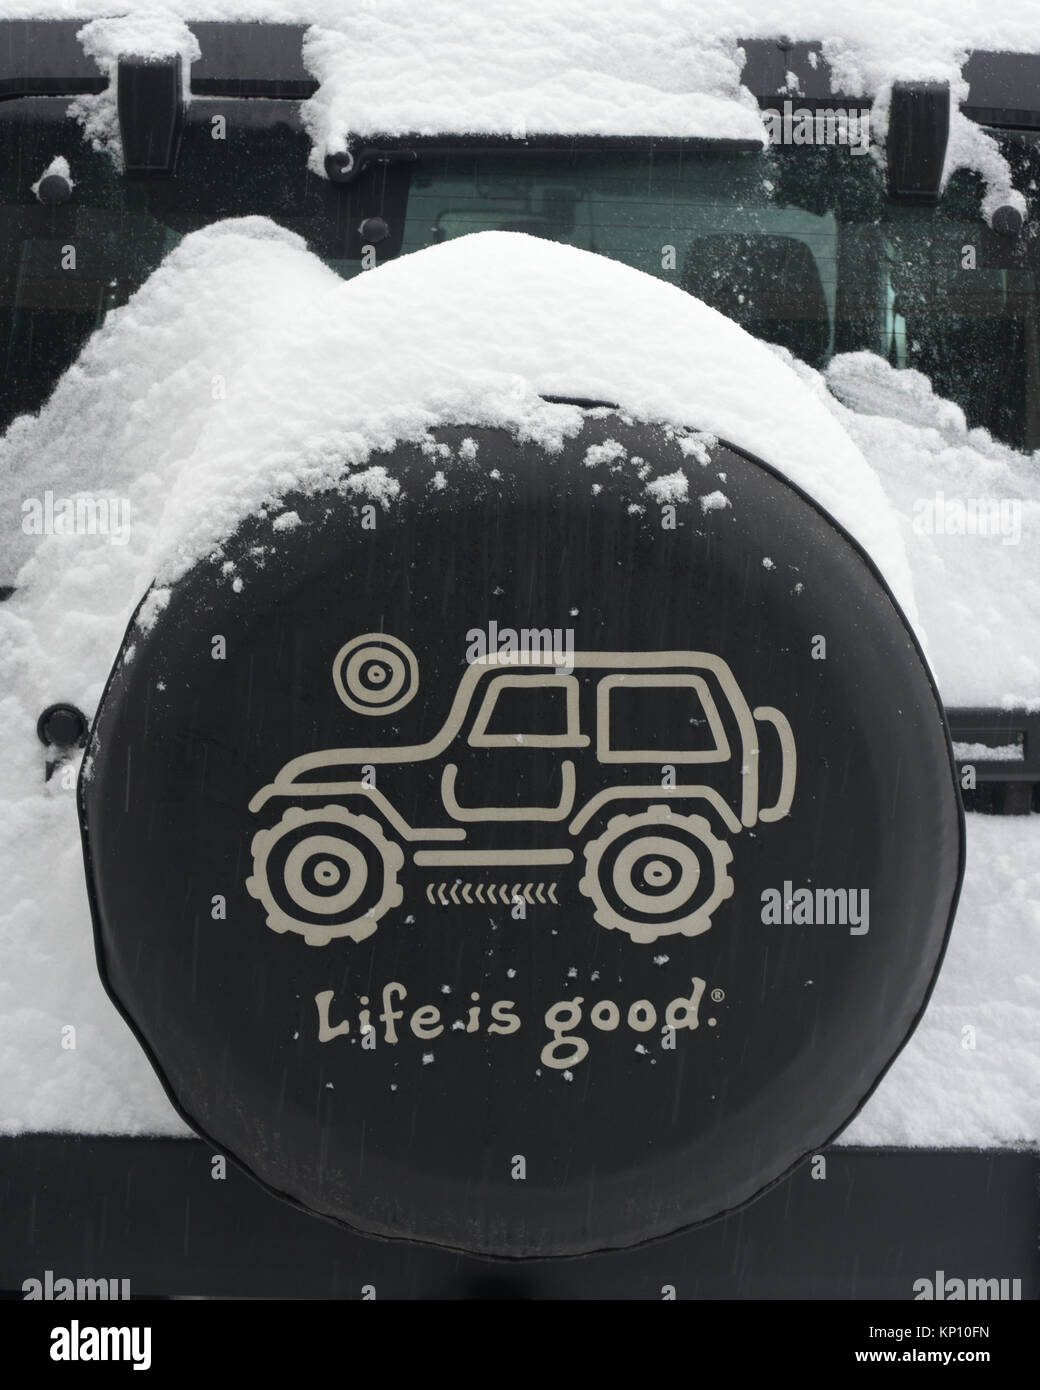 A Life is Good brand spare tire cover on the spare tire of a Jeep Wrangler  in winter covered with snow in a snow storm in the Adirondack Mountains  Stock Photo -